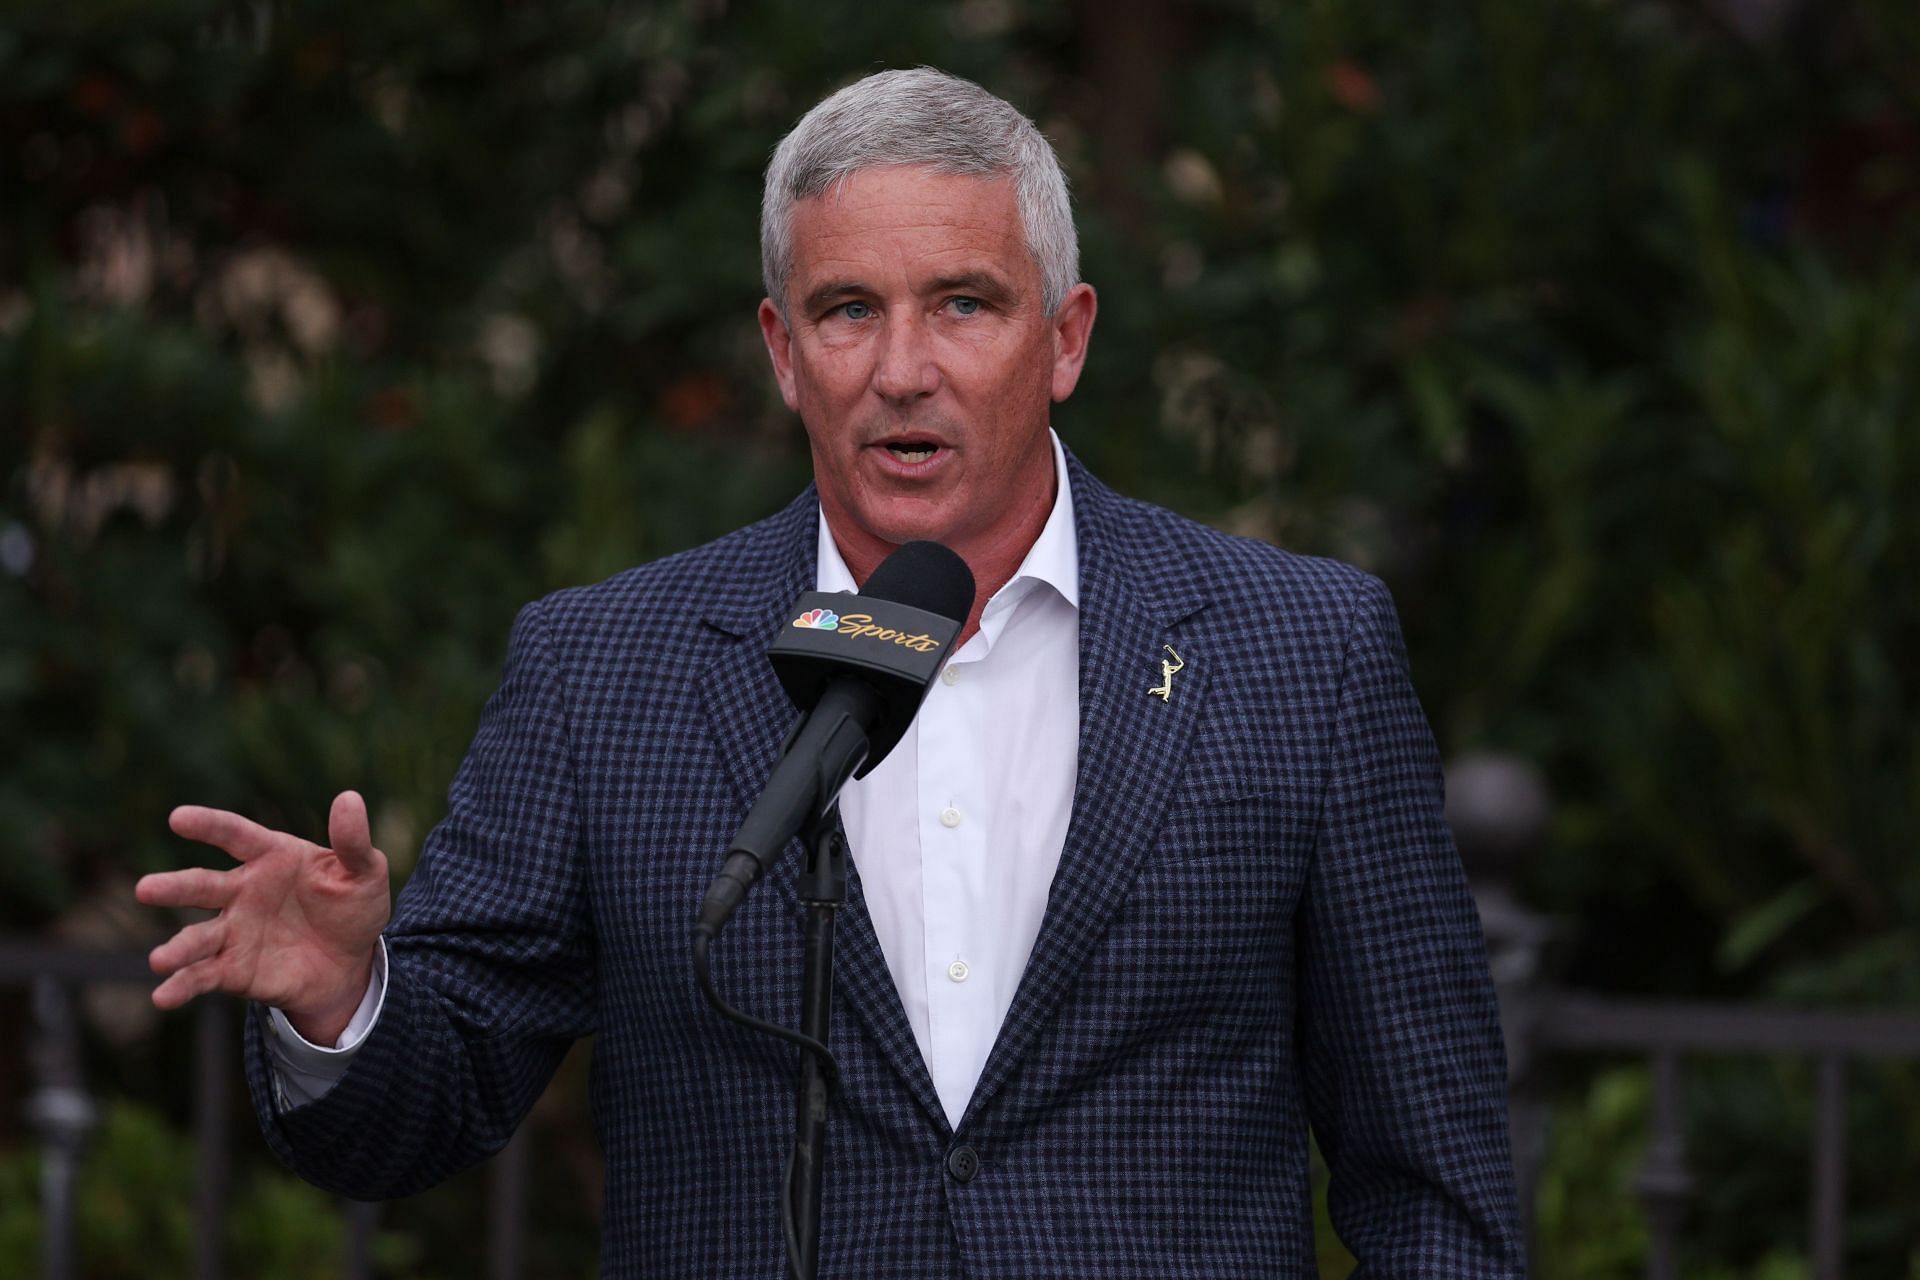 Jay Monahan was criticized for his decision regarding LIV Golf